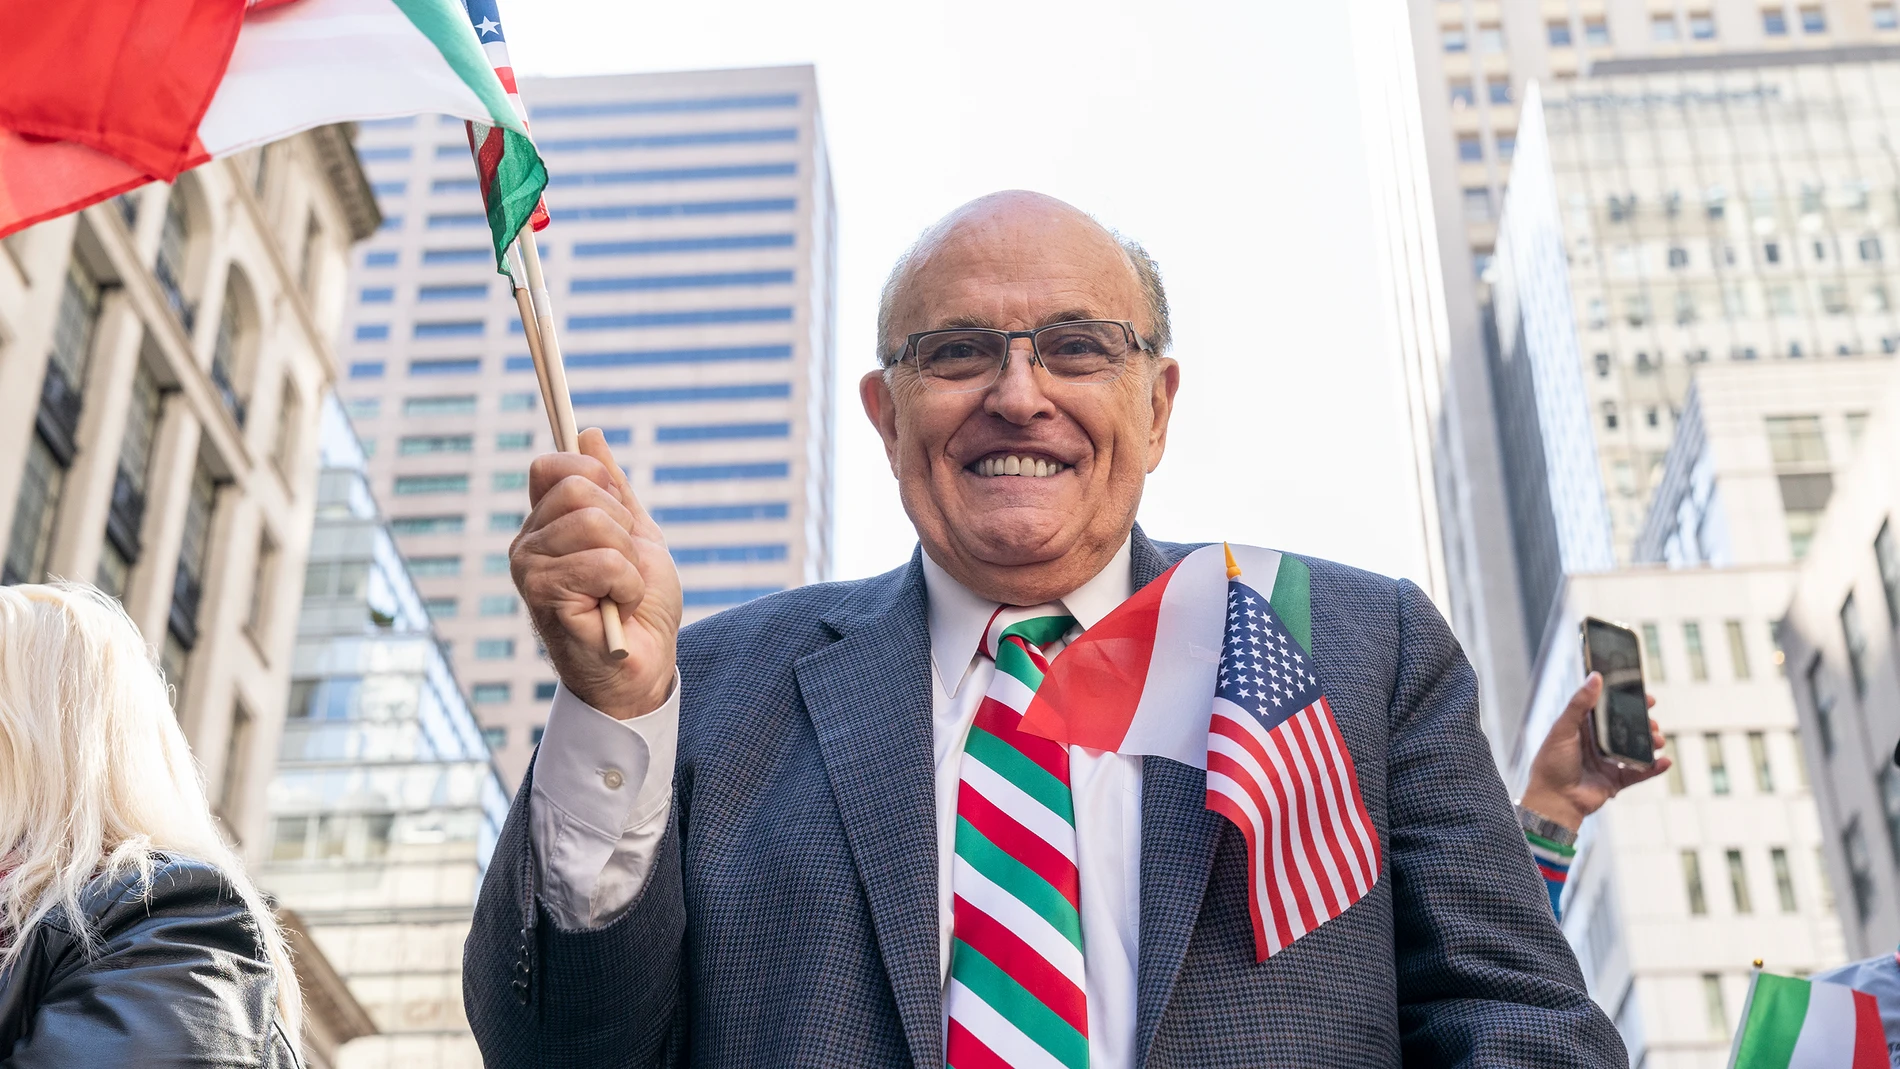 October 11, 2022, New York, New York, United States: Former mayor Rudy Giuliani attends annual Columbus Day parade on Fifth Avenue in Manhattan (Foto de ARCHIVO) 11/10/2022